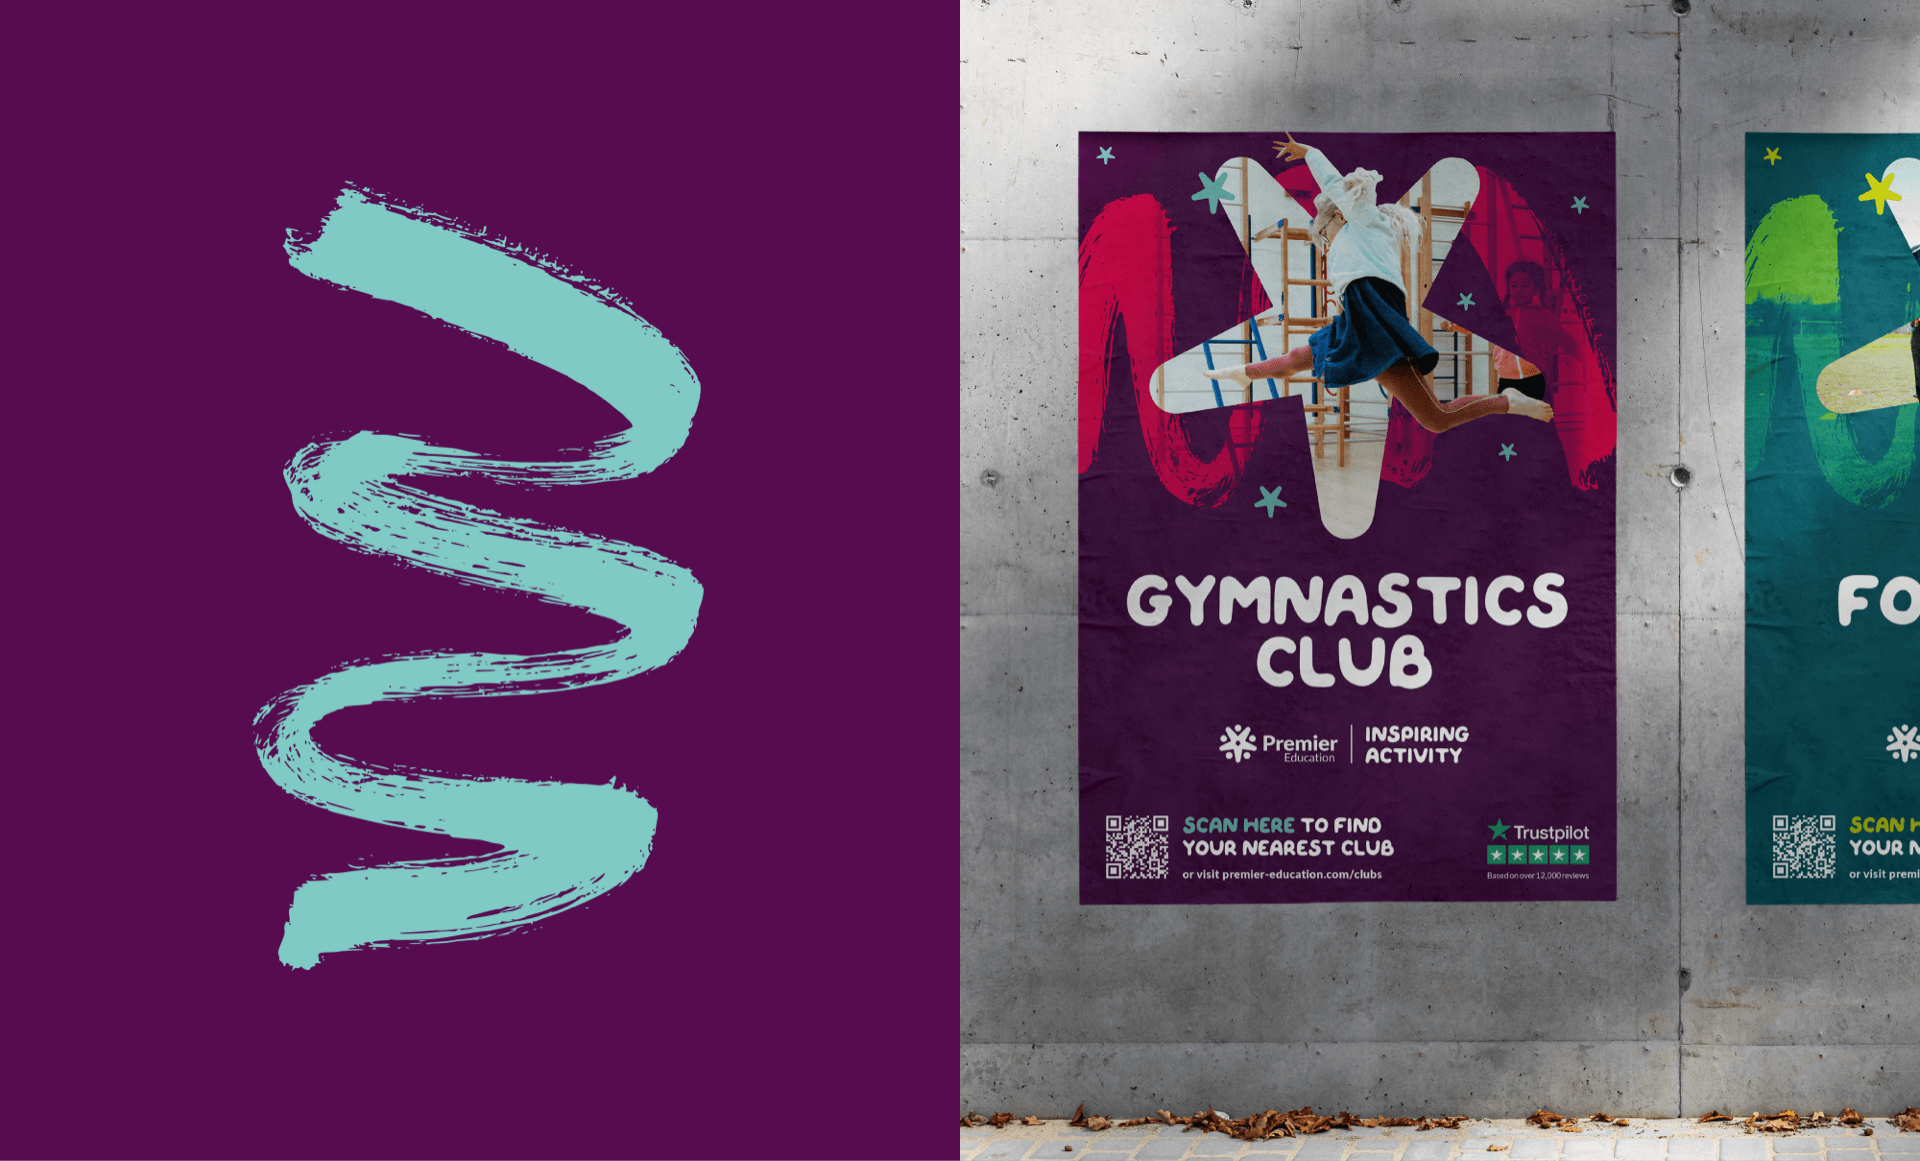 A mockup of a poster showing the promotion of a gymnastics club hosted by Premier Education.